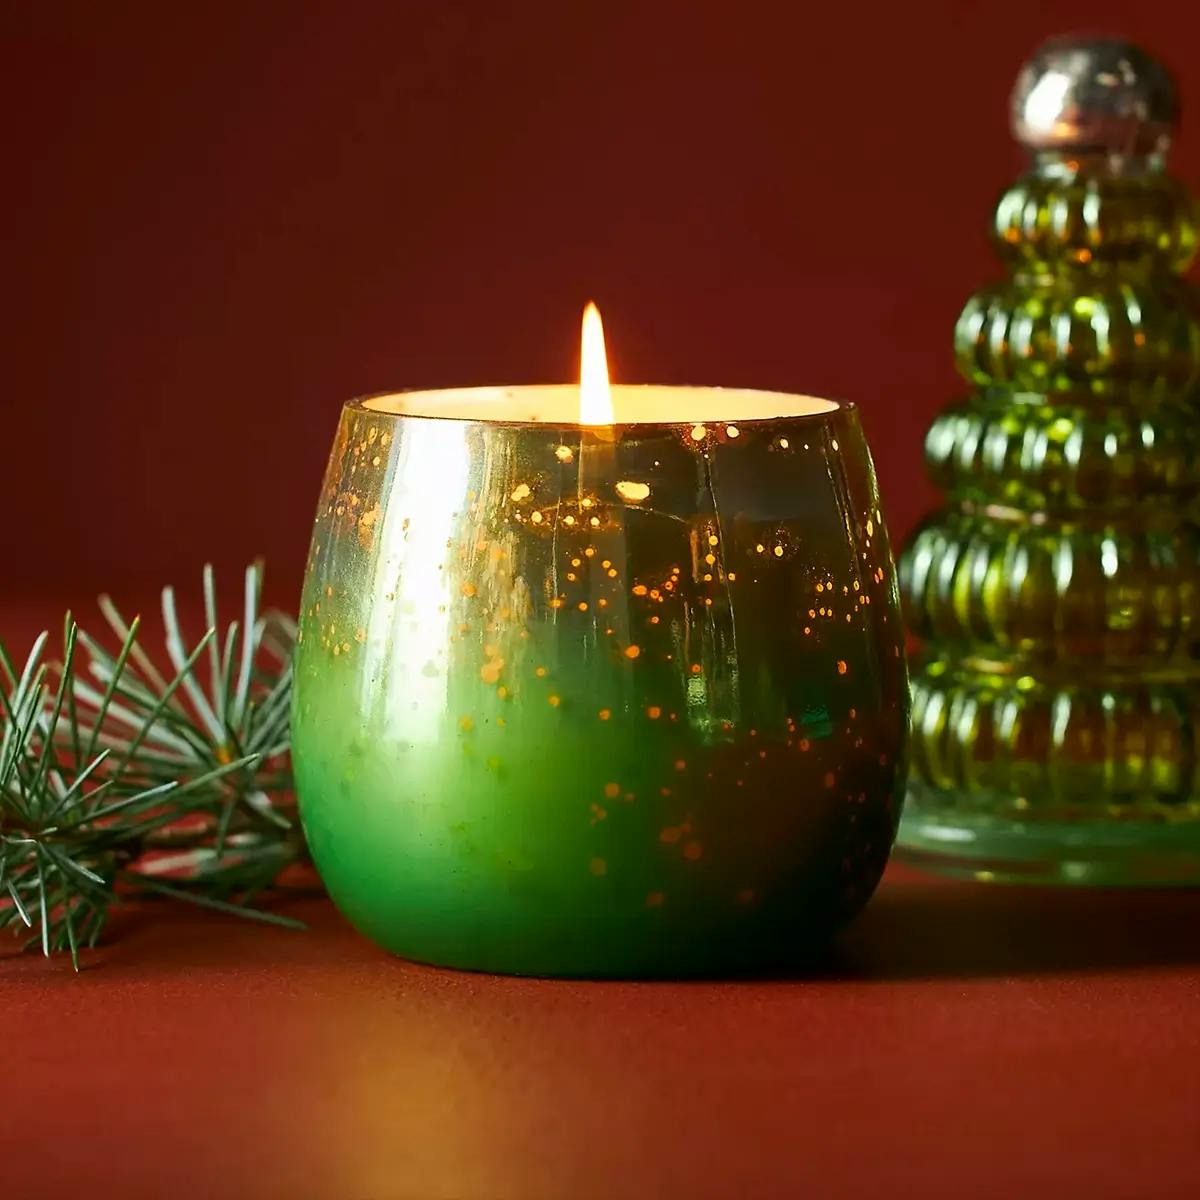  Green Treetop Christmas candle by Anthropologie, with glass fir tree-shaped top in background.